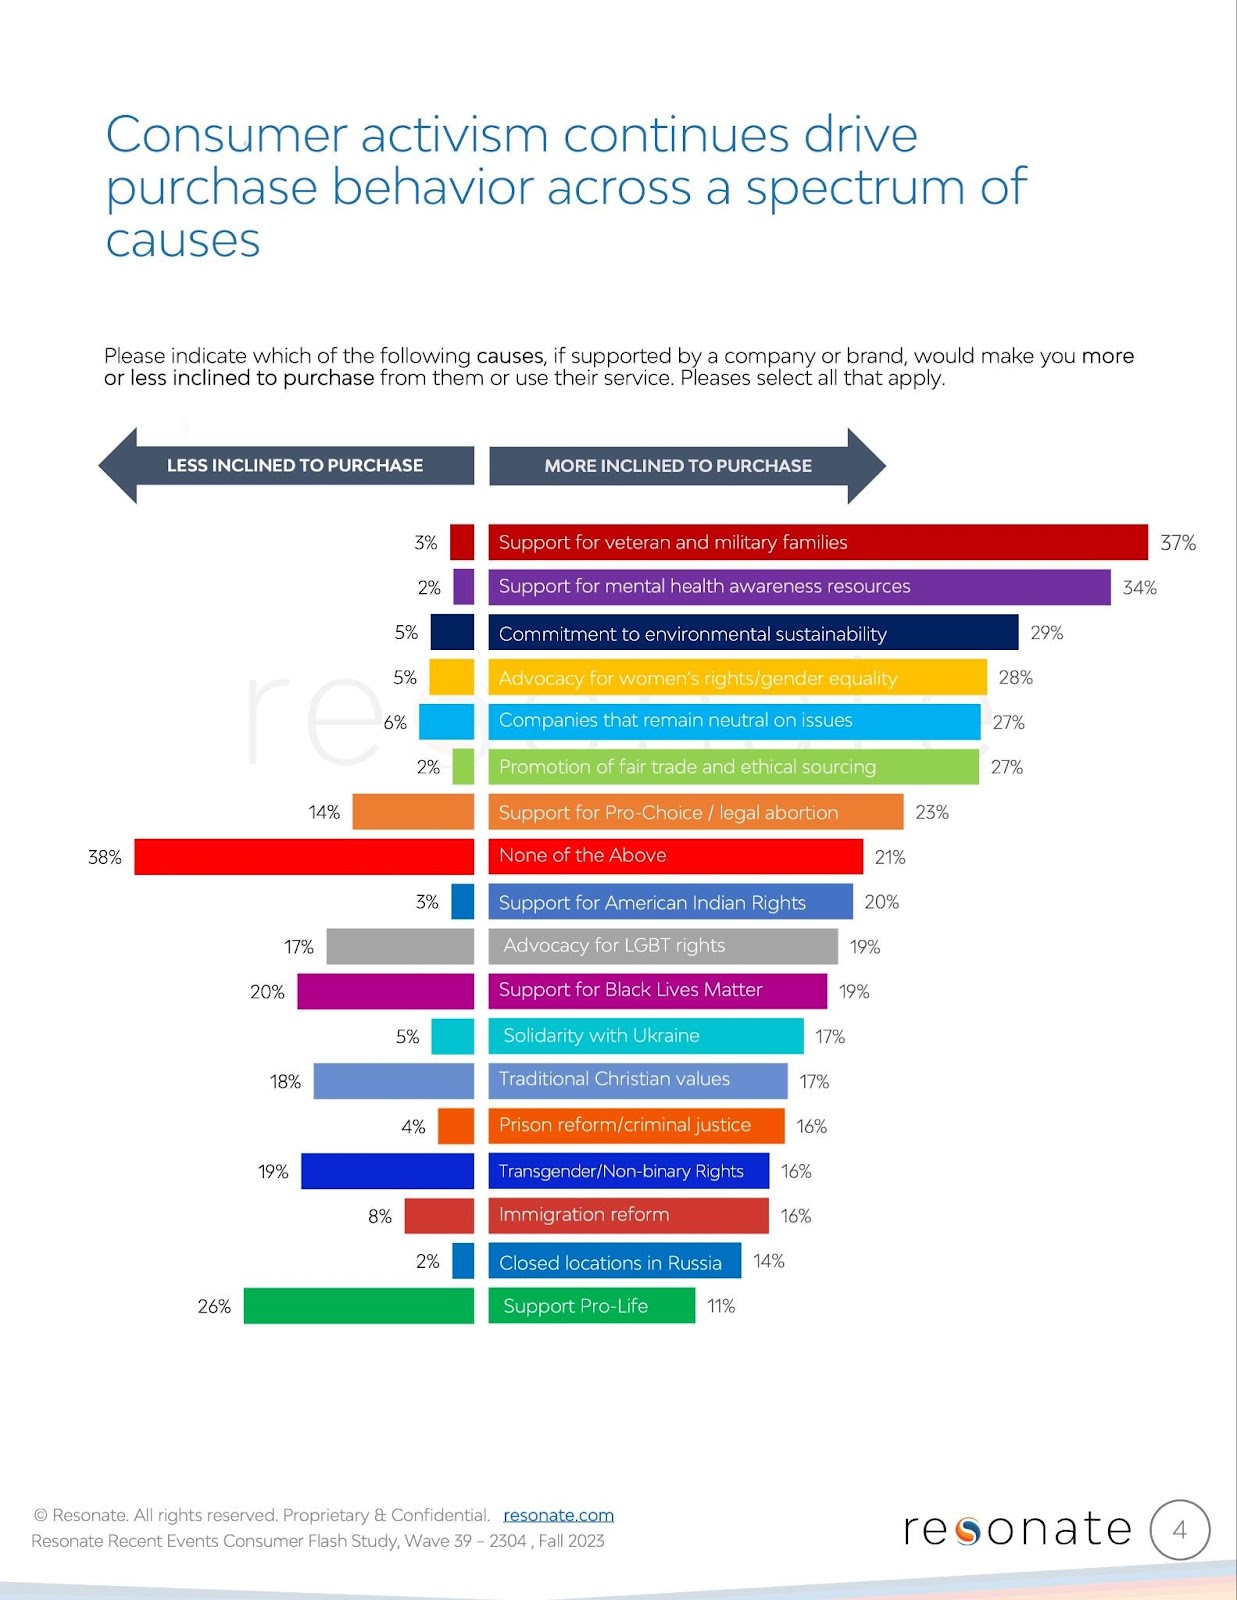 Graph showing the impact of societal causes supported by brands has on cunsumer behavior